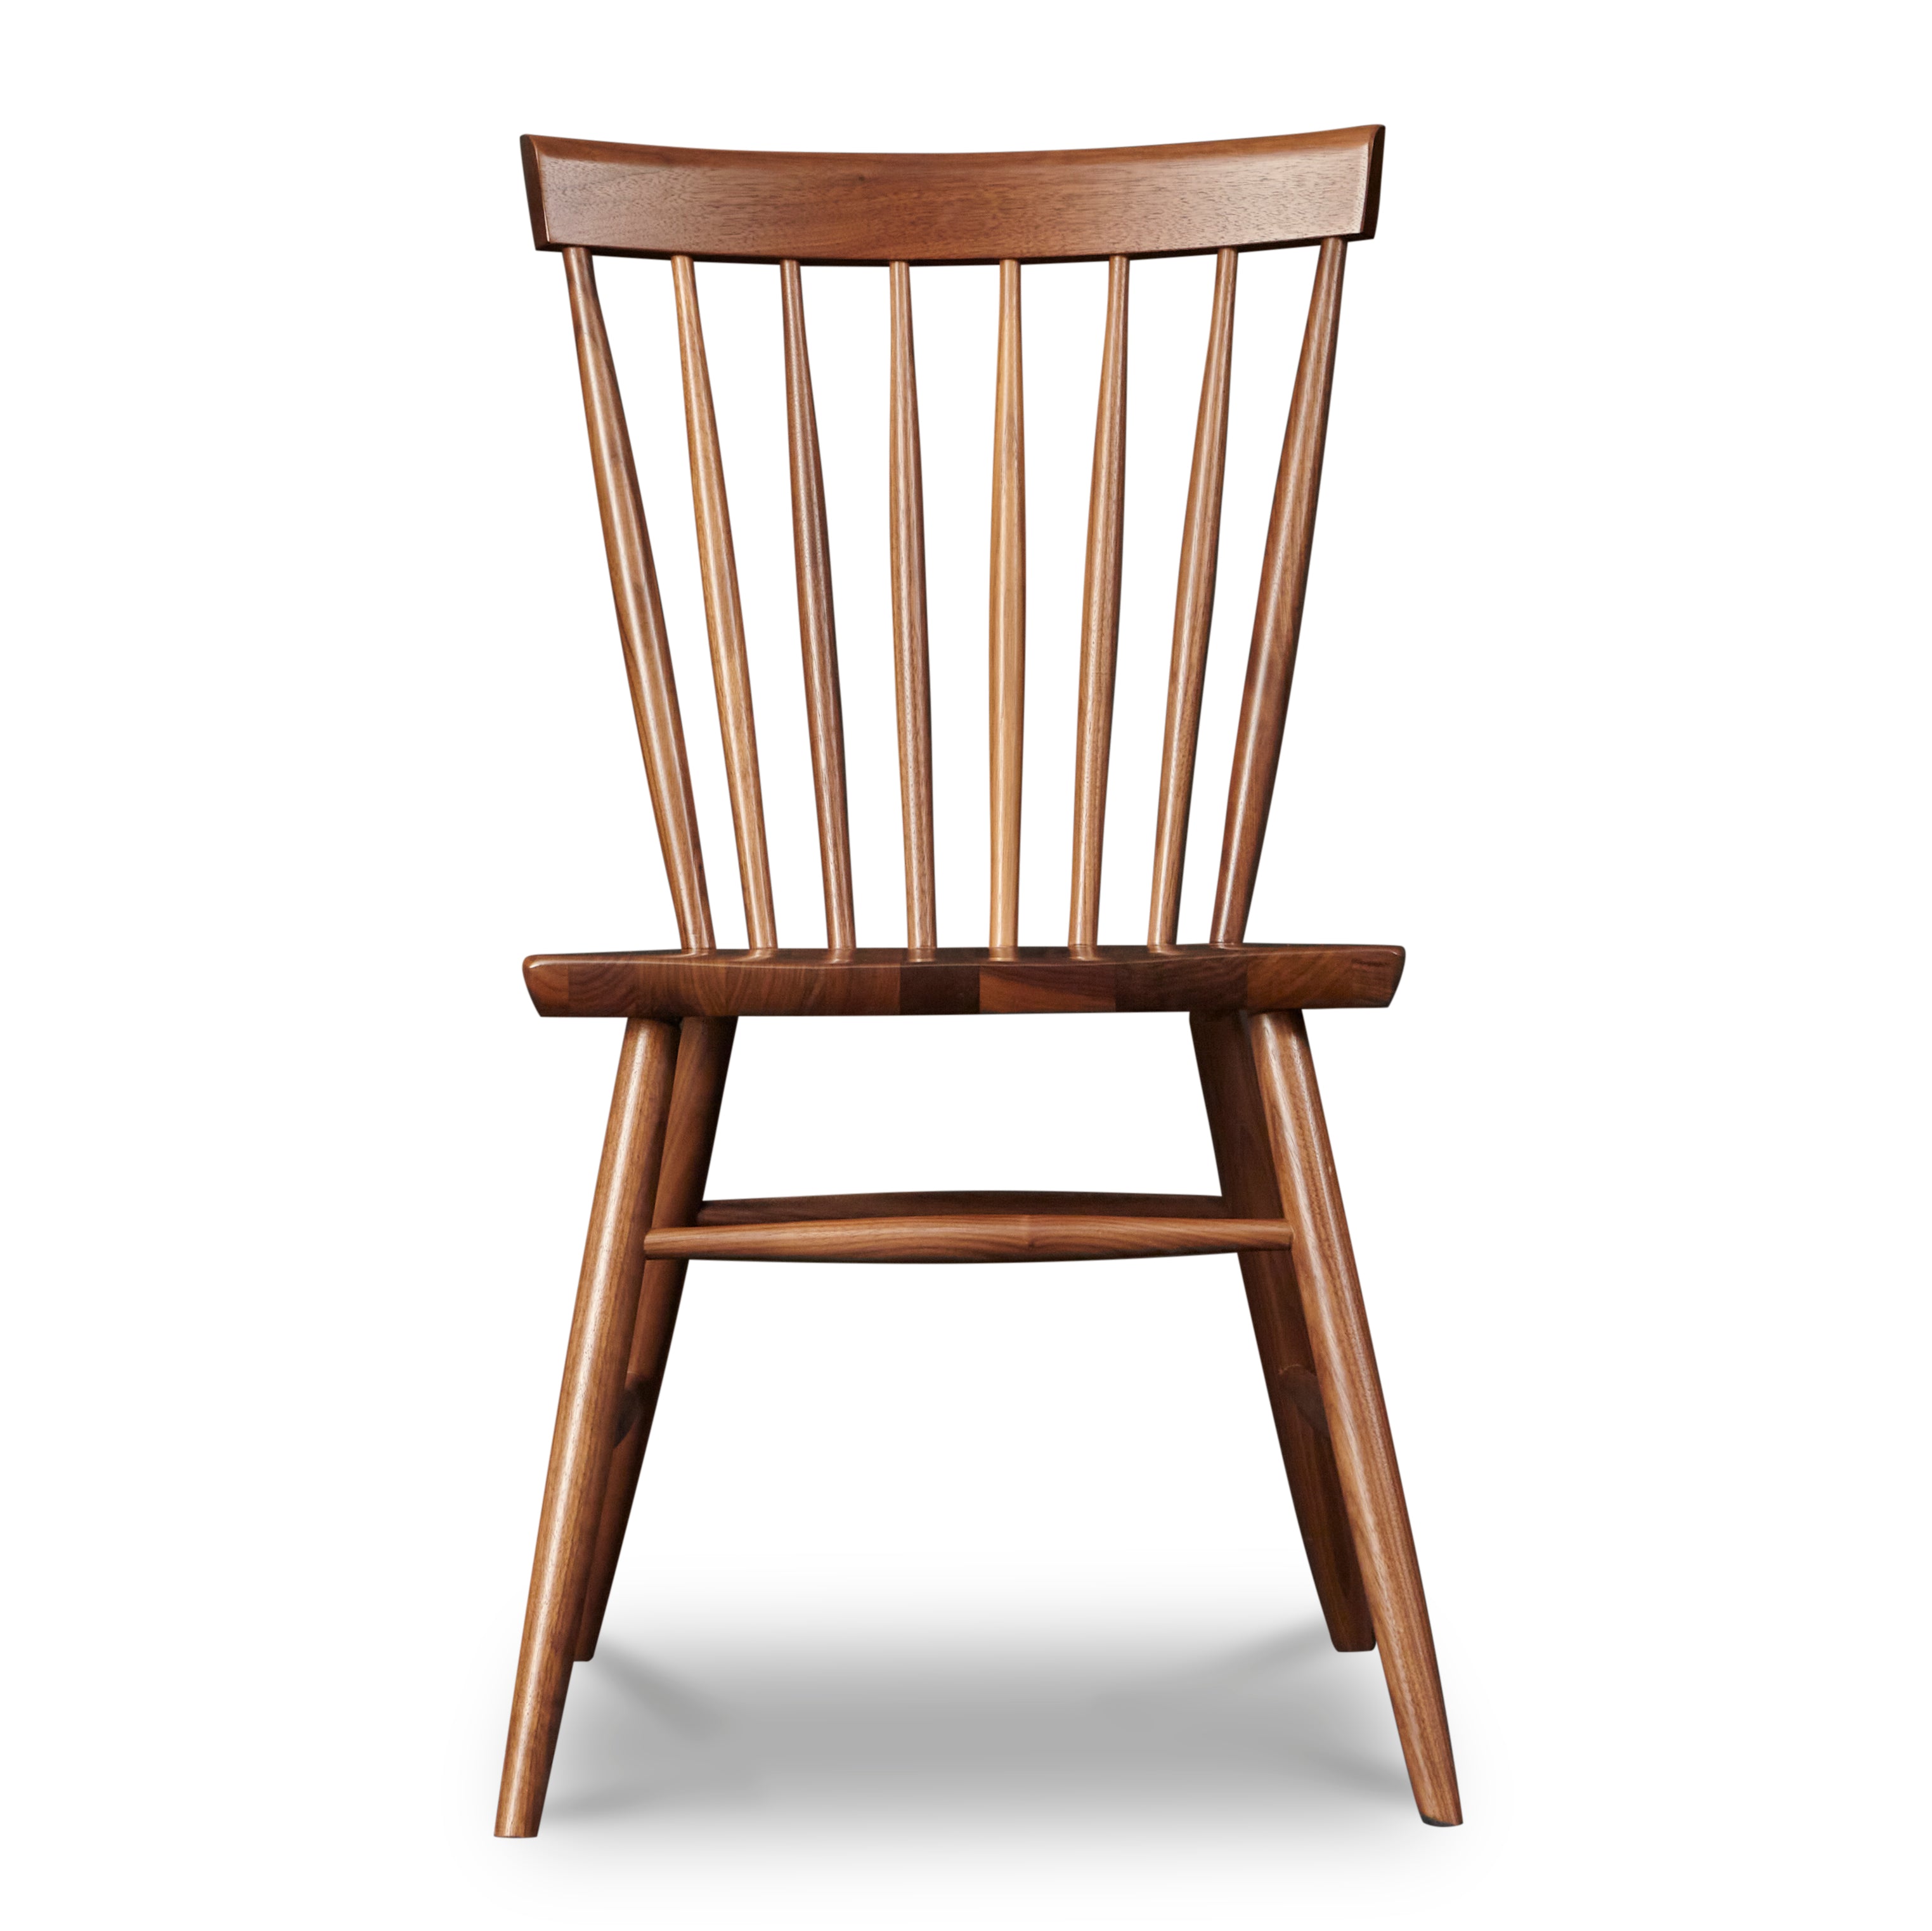 Front view of spindle style dining chair in walnut wood from Chilton Furniture